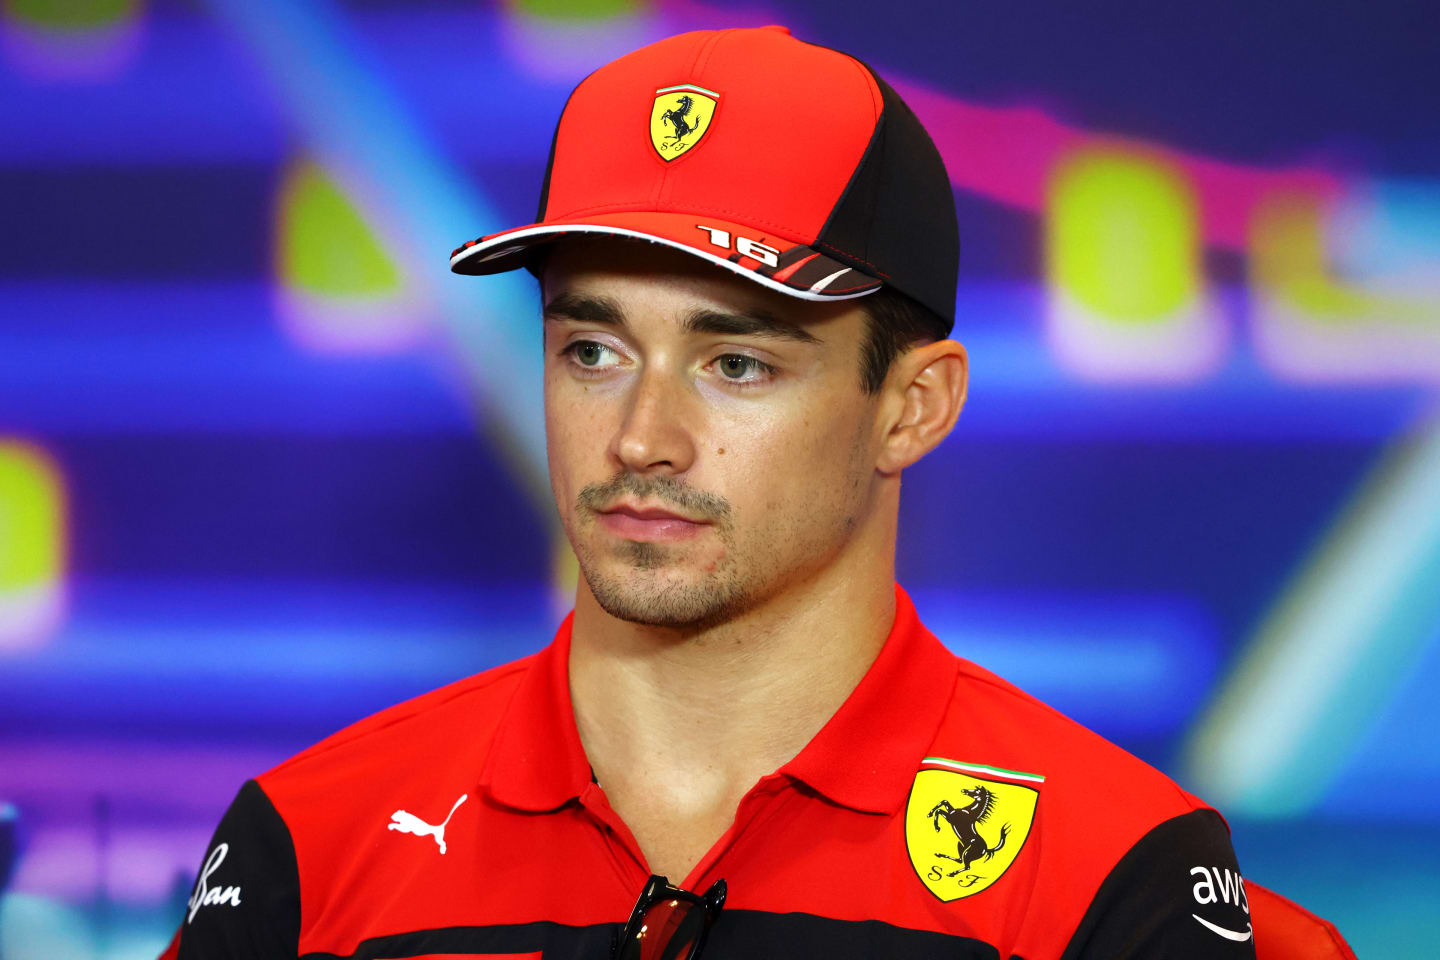 ABU DHABI, UNITED ARAB EMIRATES - NOVEMBER 17: Charles Leclerc of Monaco and Ferrari talks in a press conference during previews ahead of the F1 Grand Prix of Abu Dhabi at Yas Marina Circuit on November 17, 2022 in Abu Dhabi, United Arab Emirates. (Photo by Bryn Lennon/Getty Images)